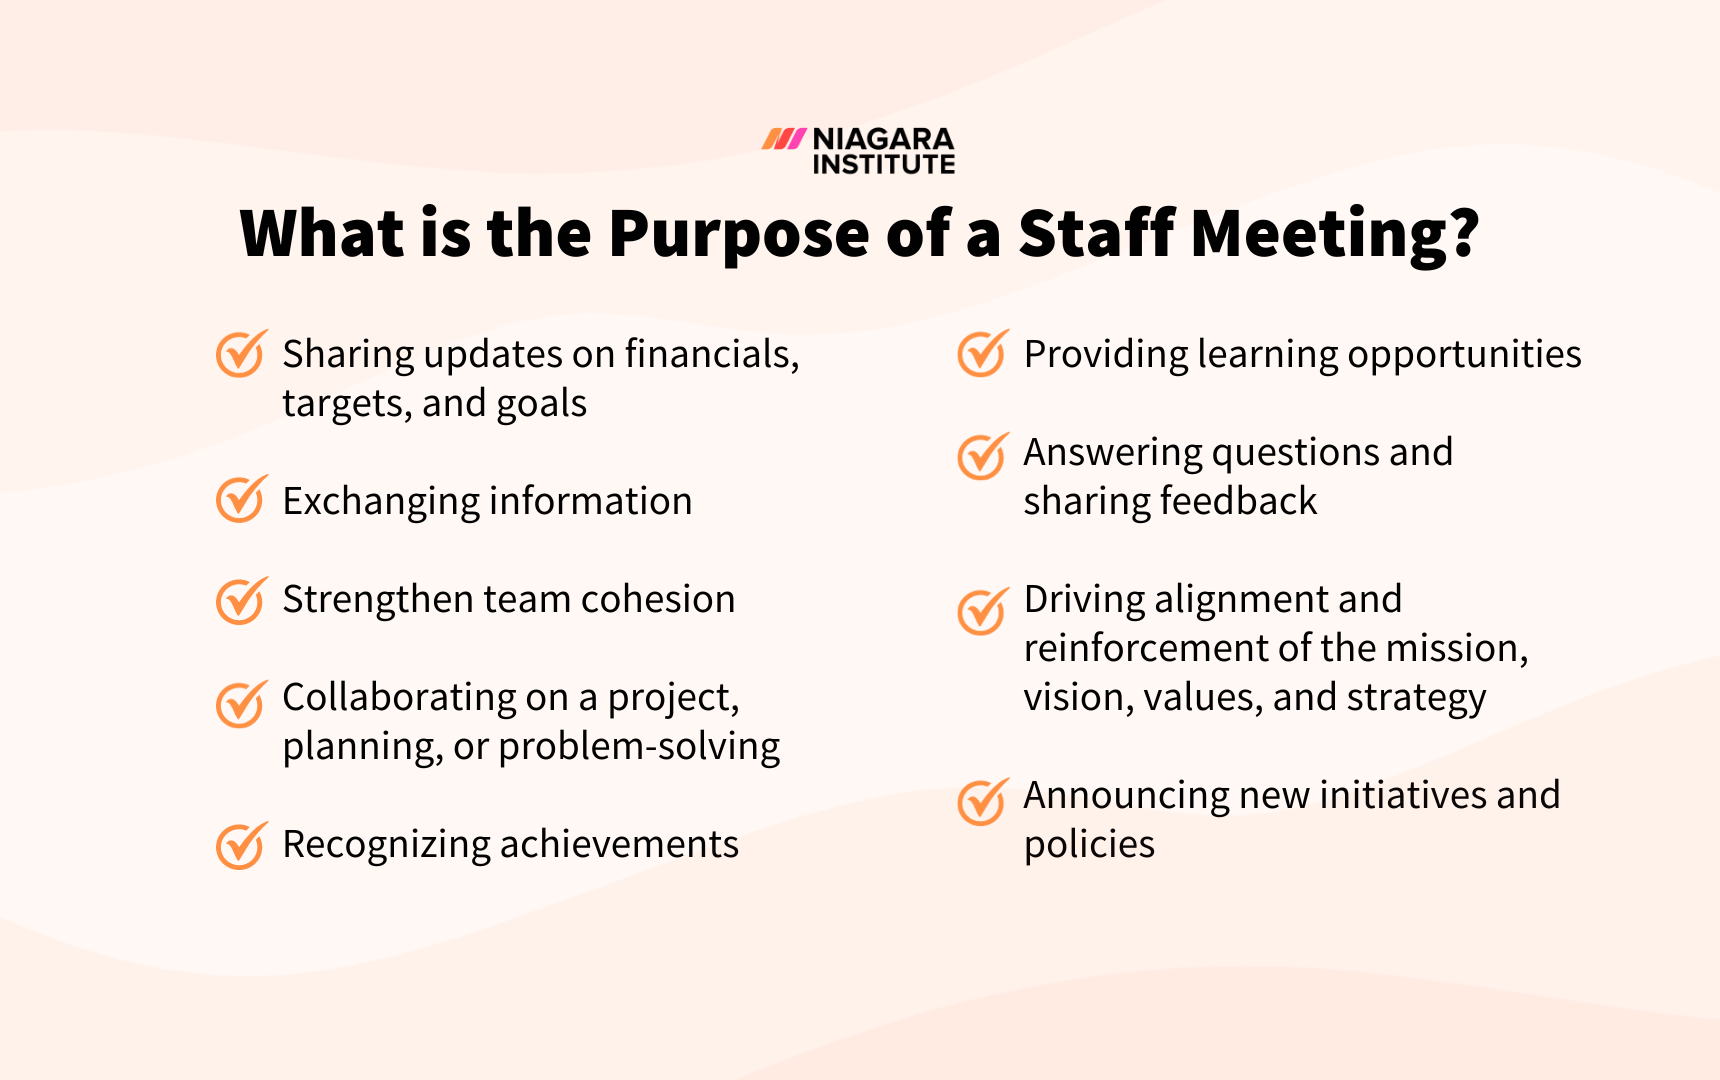 What is the Purpose of a Staff Meeting (1)